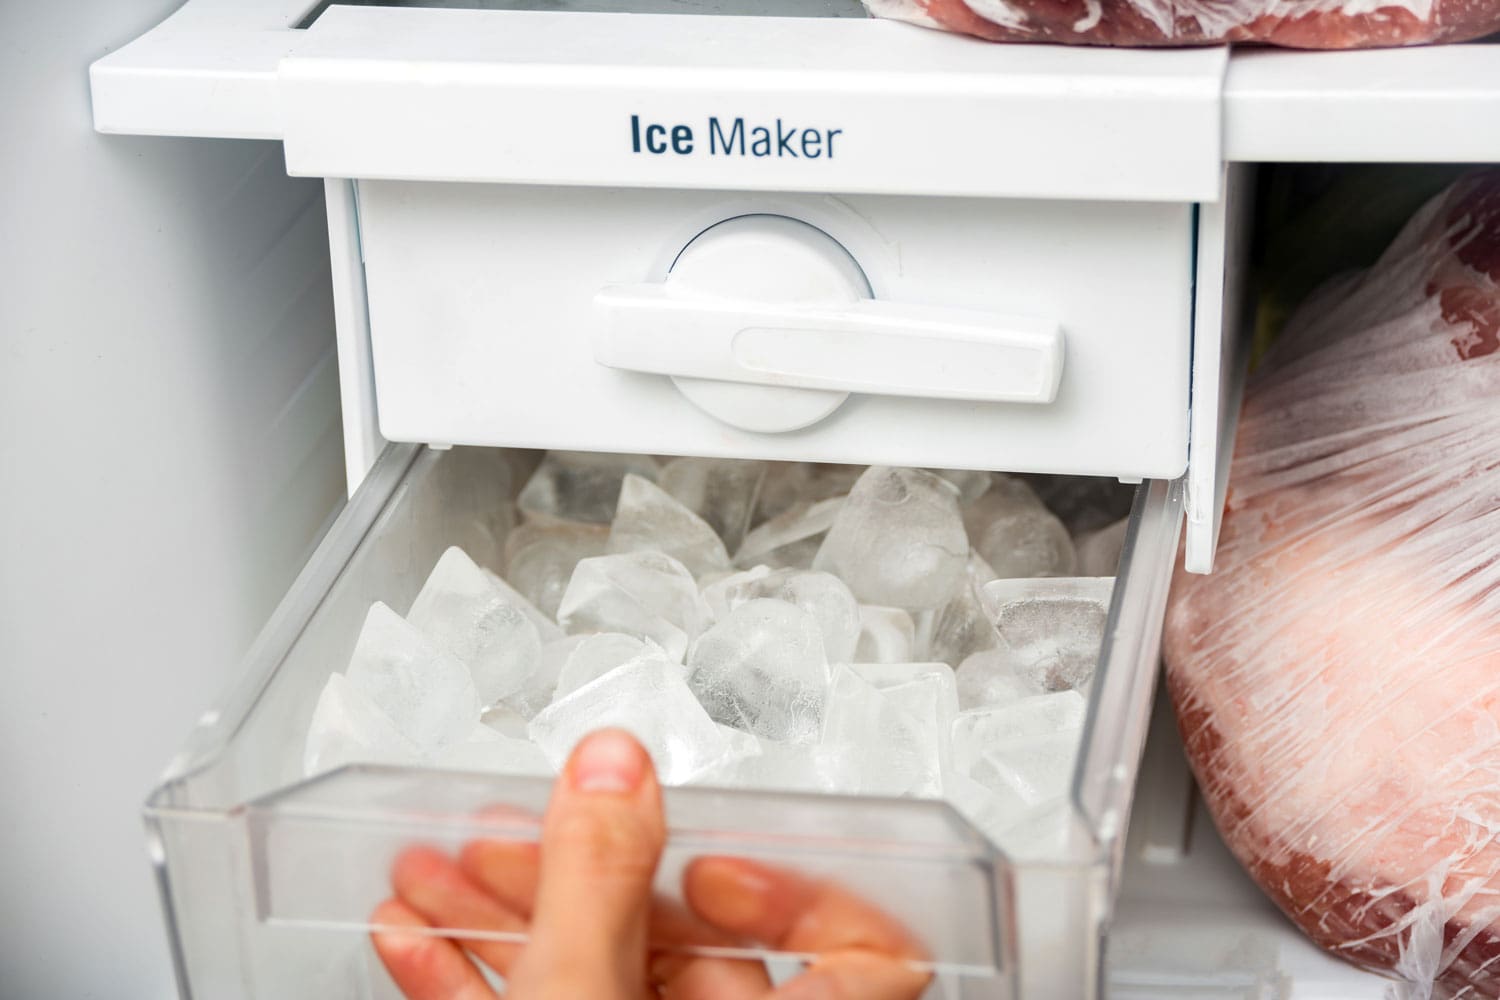 Getting ice from the ice maker